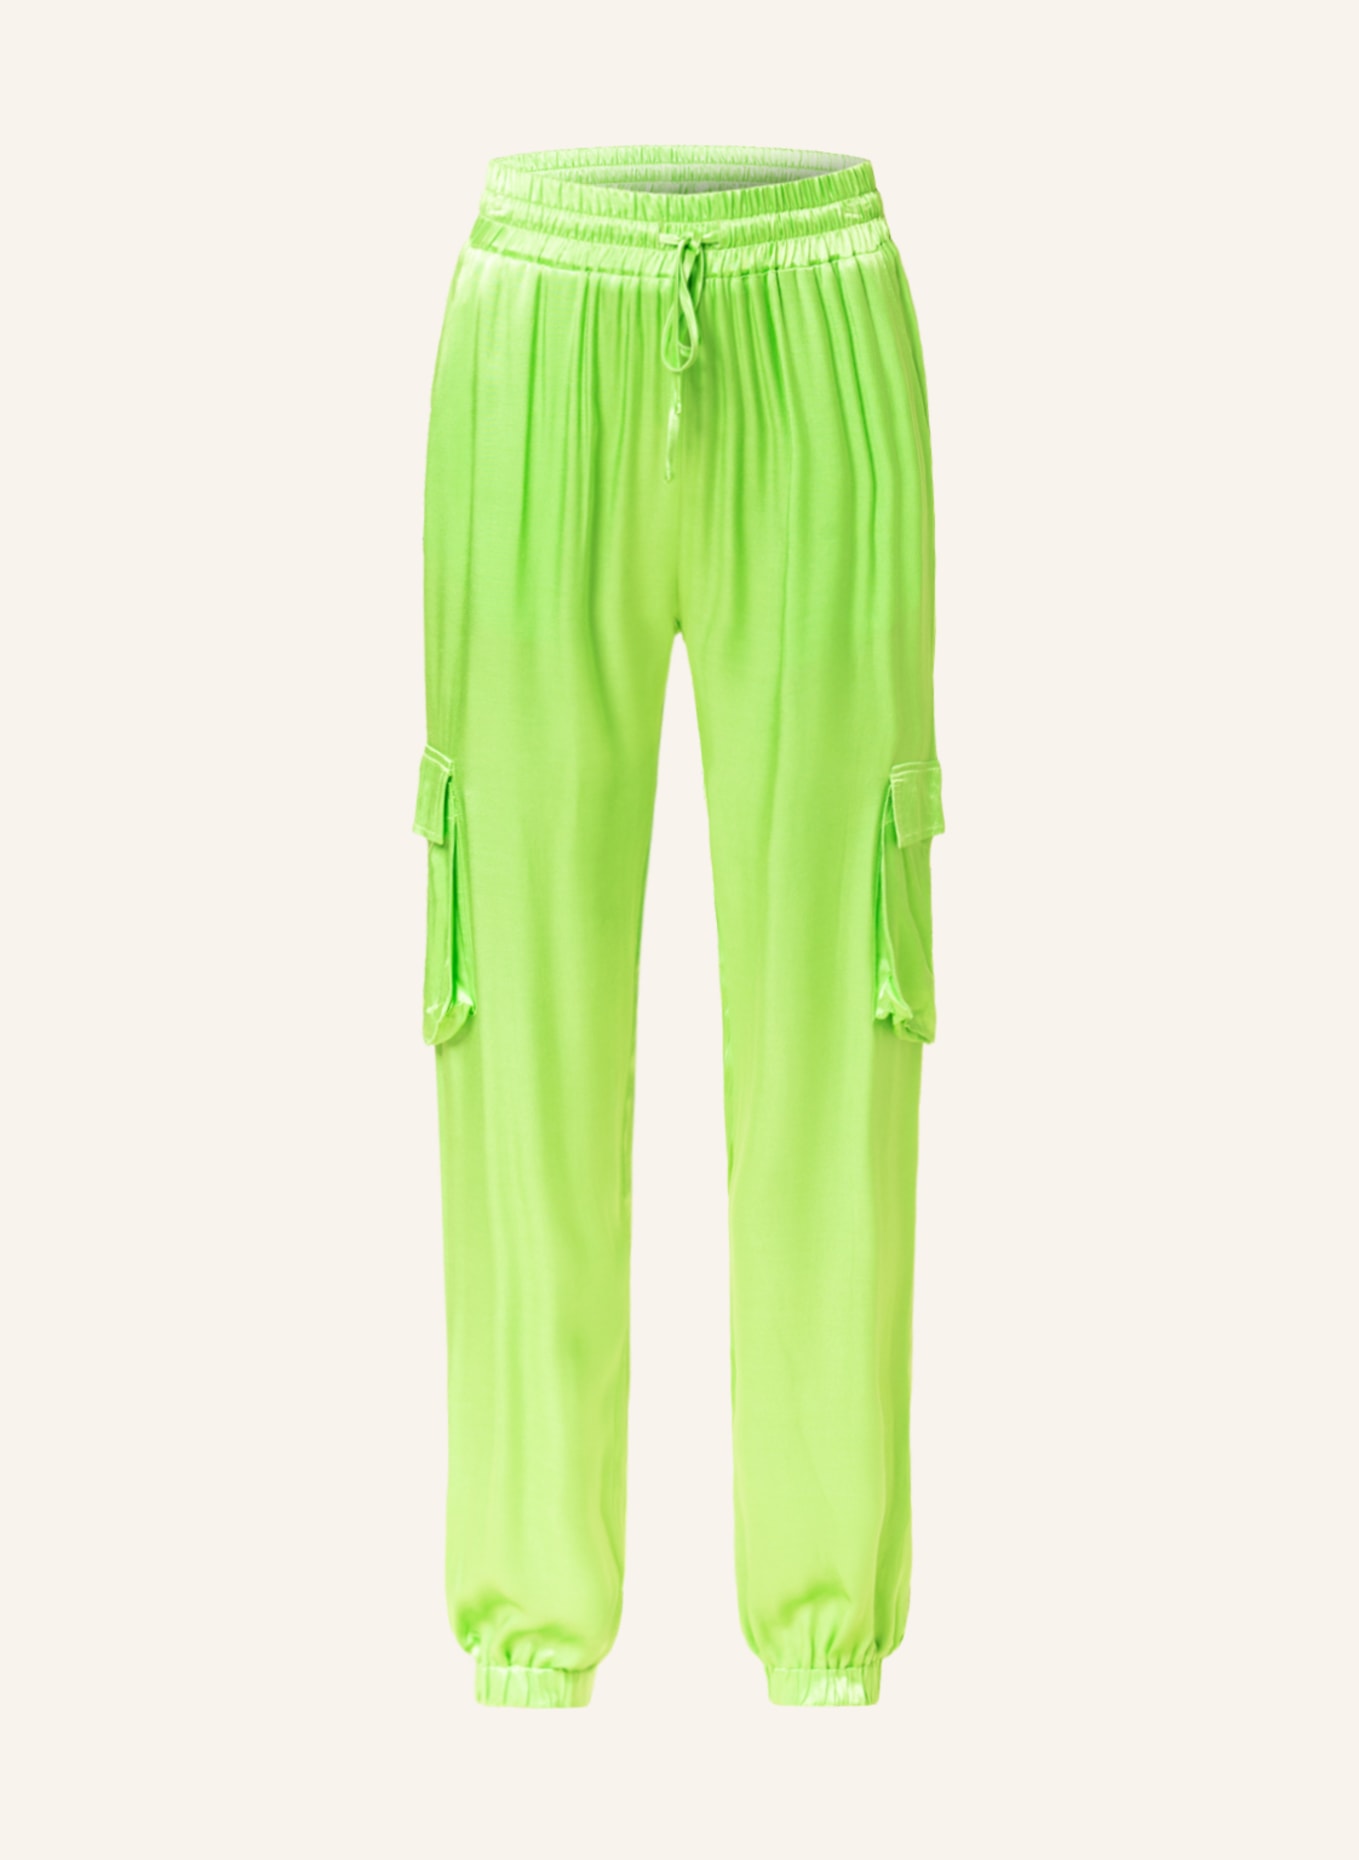 MRS & HUGS Cargo pants made of satin, Color: NEON GREEN (Image 1)